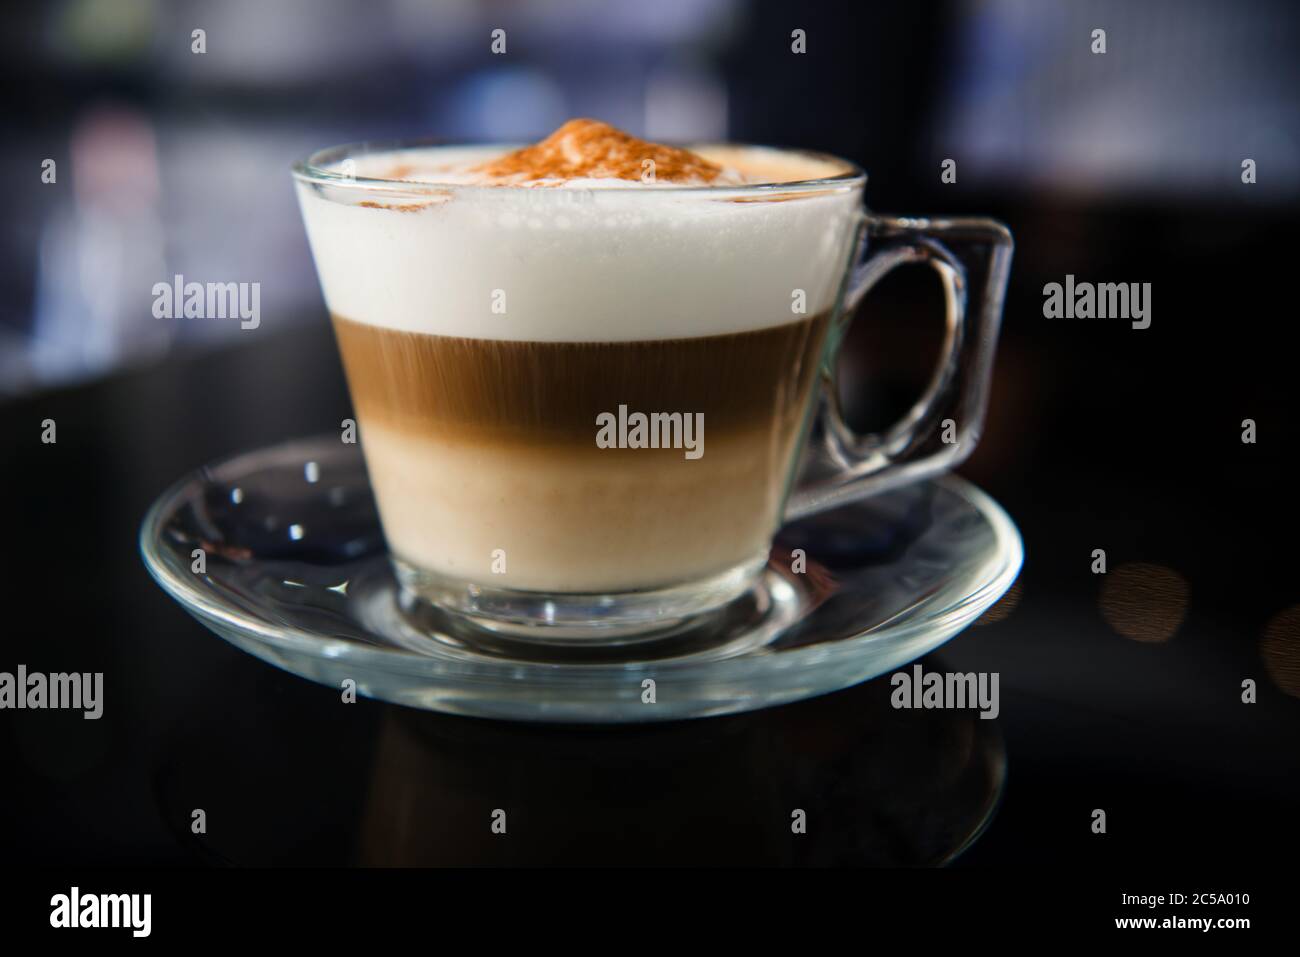 Cappaccino beverage in a restaurant setting Stock Photo